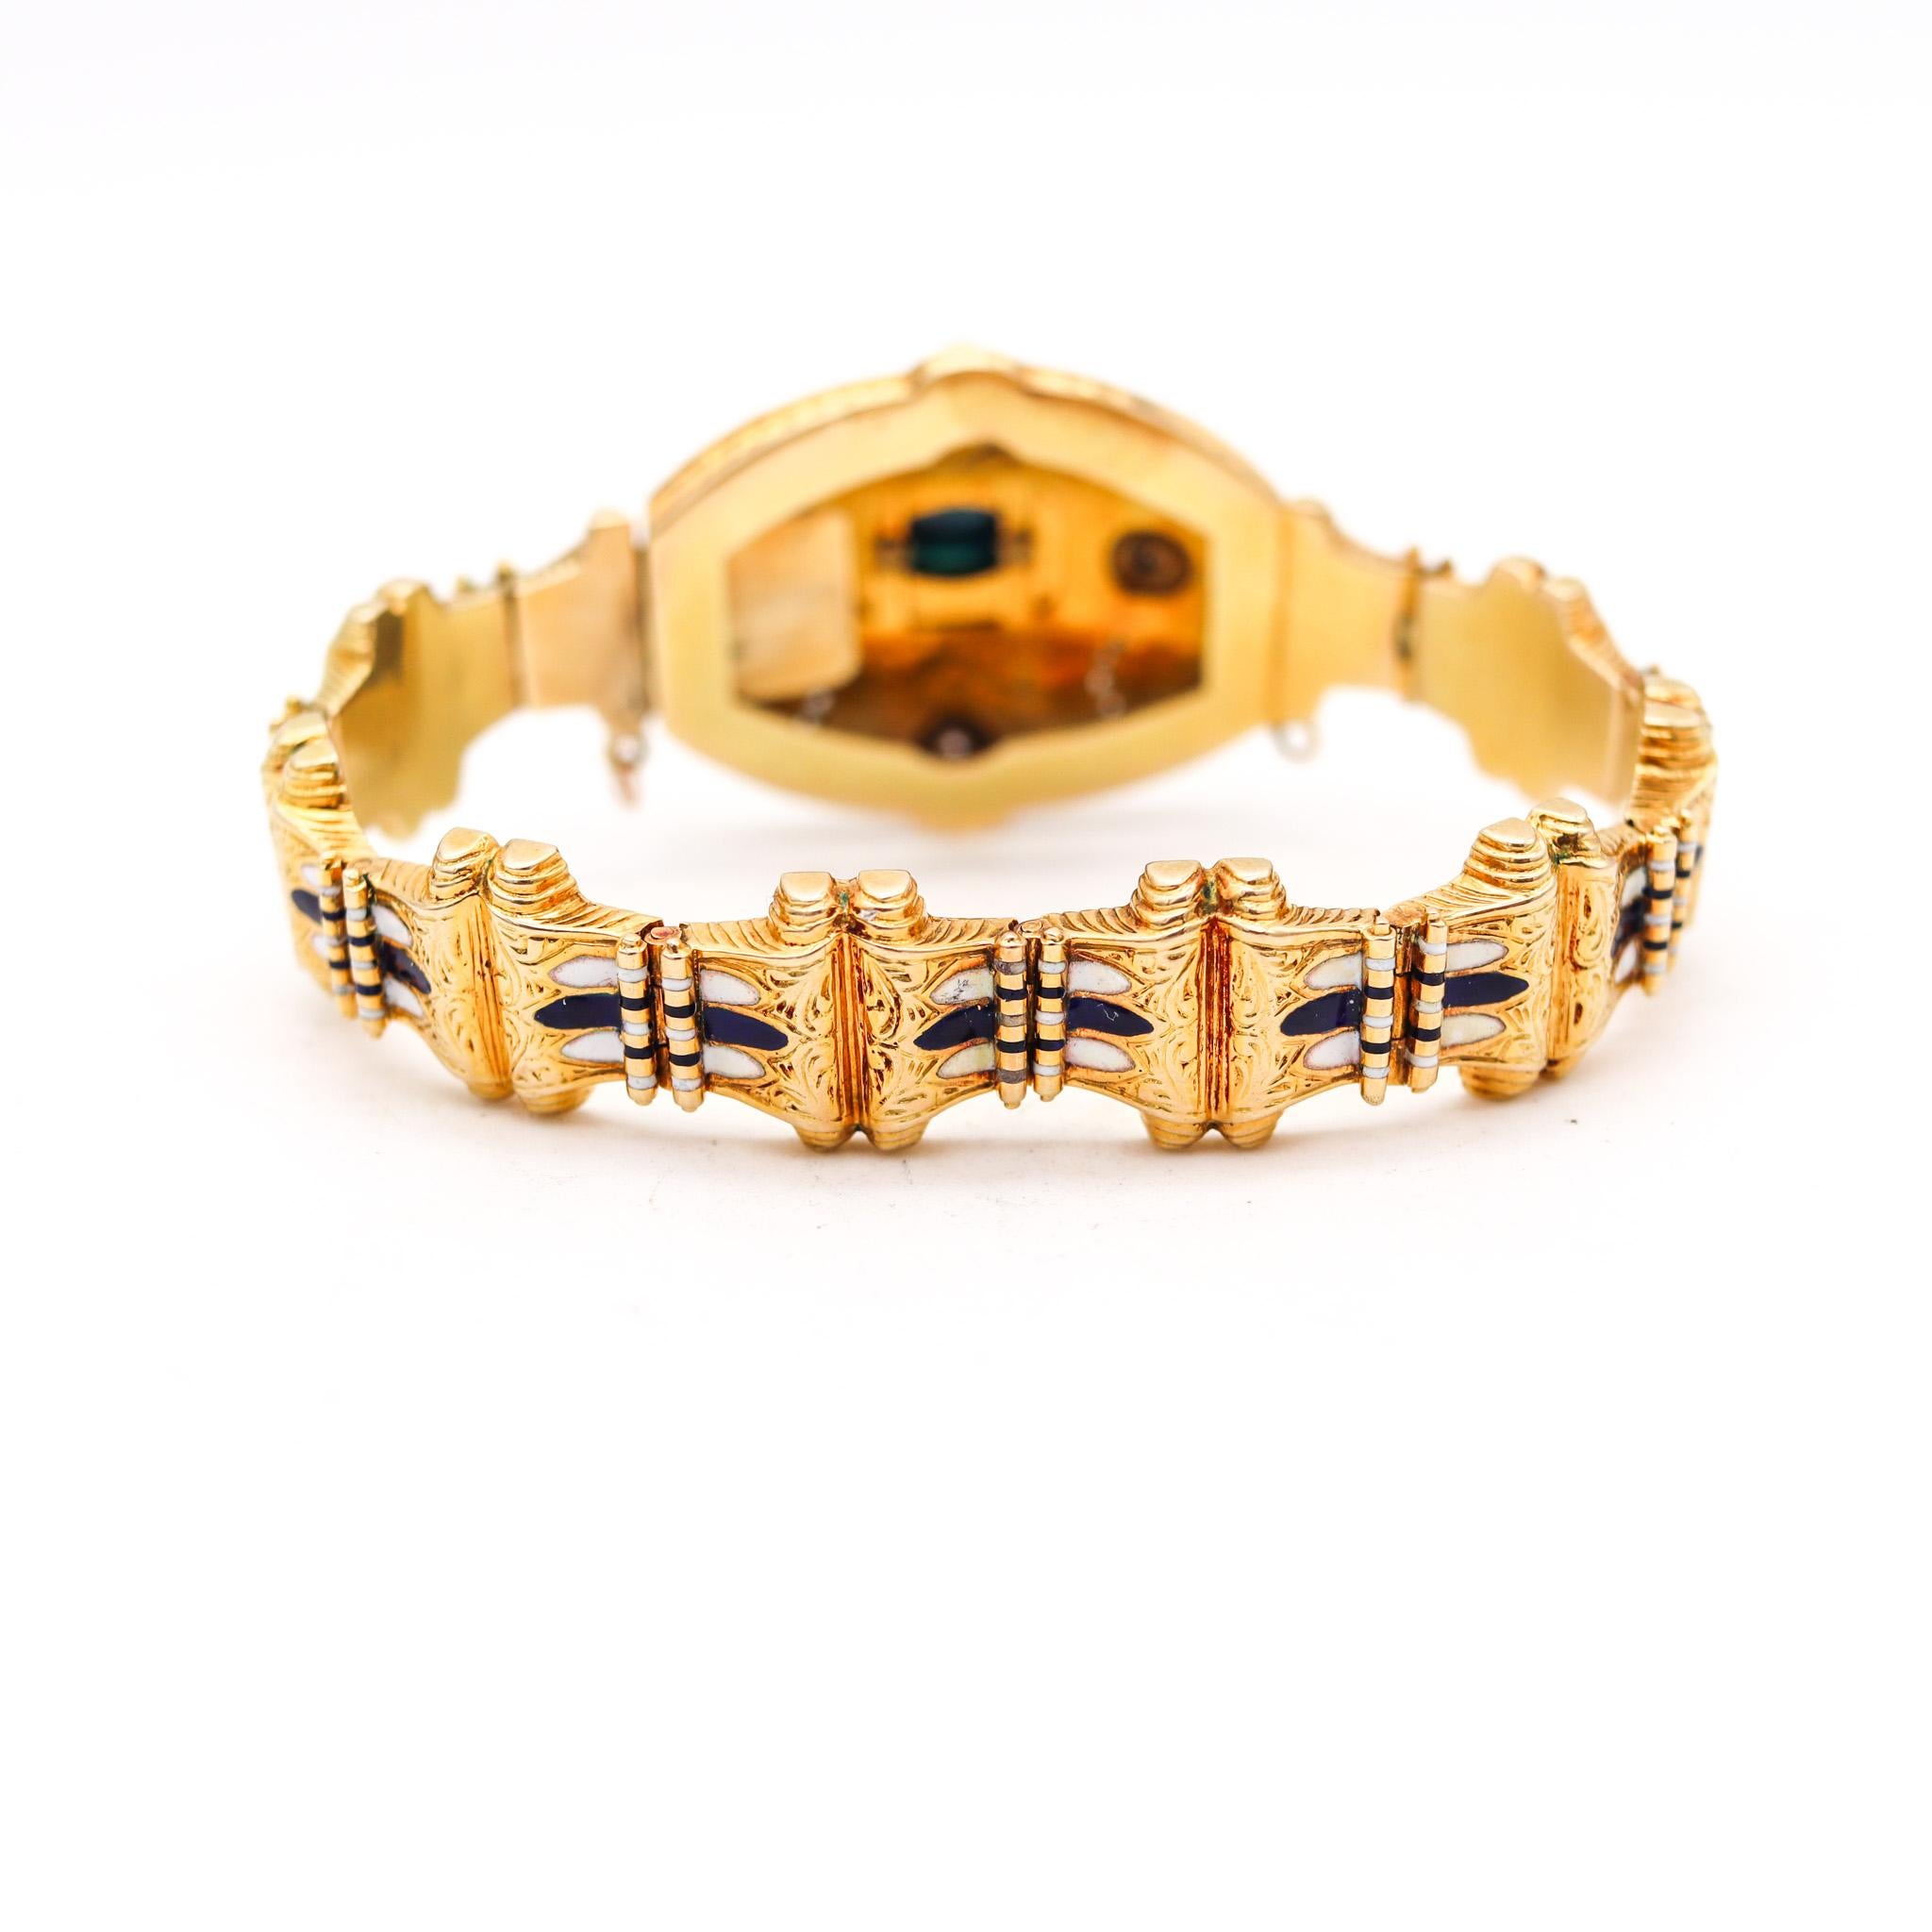 Women's Edwardian 1900 Enameled Bracelet In 18Kt Yellow Gold With Sapphires And Diamonds For Sale